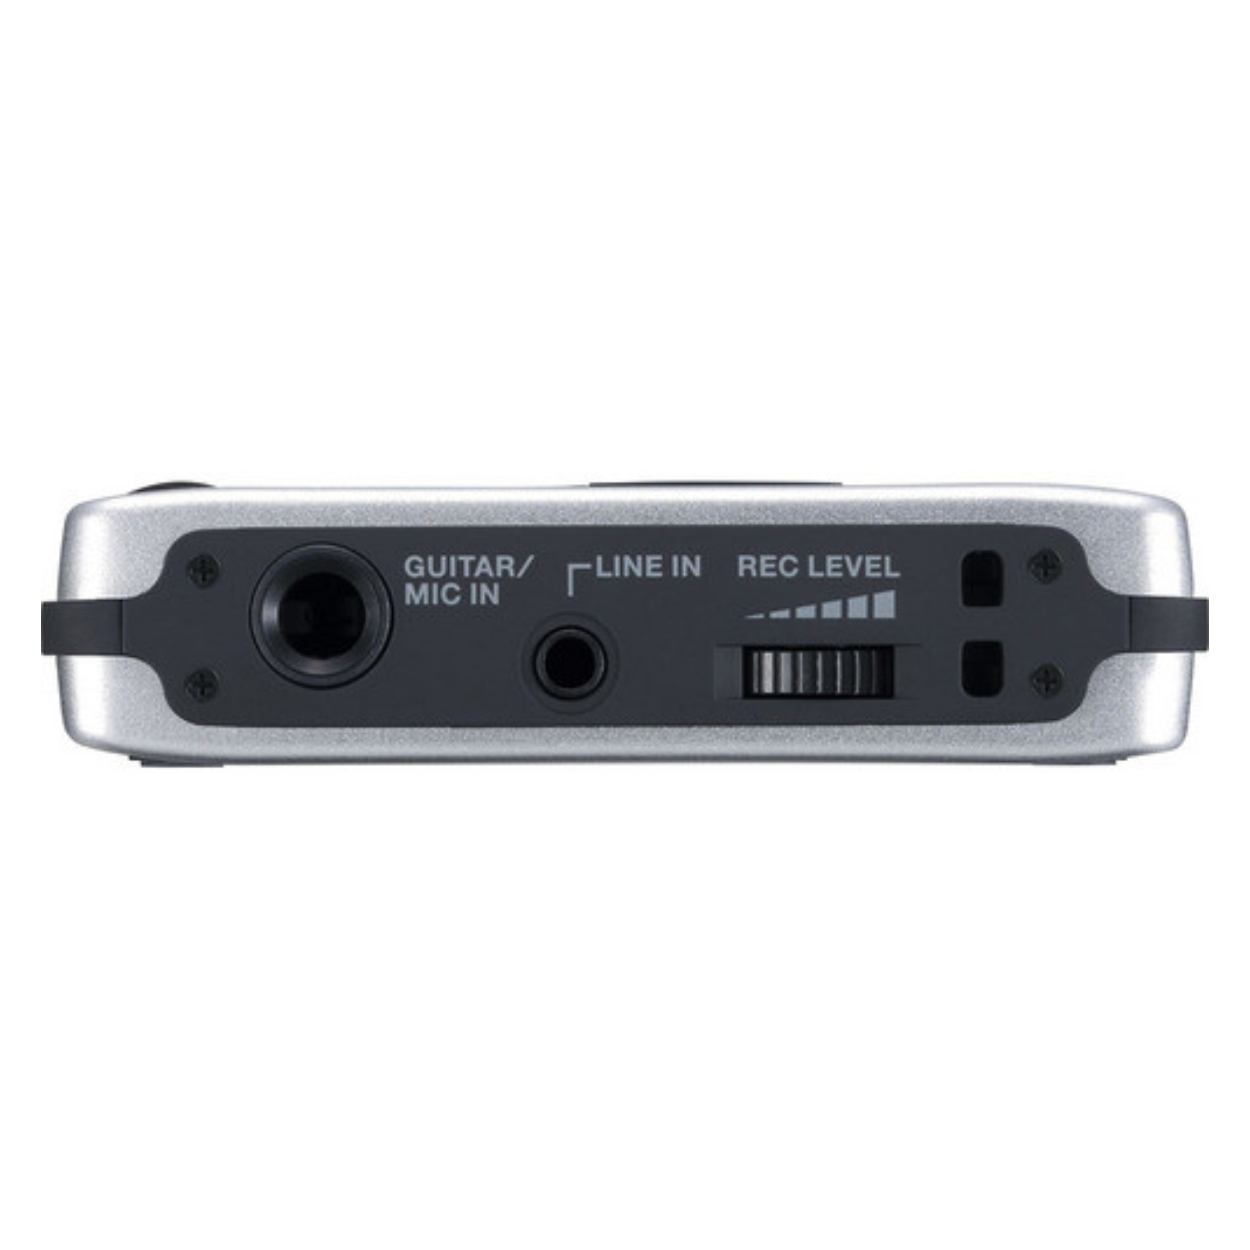 BOSS BR-80 MICRO BR 8-TRACK DIGITAL RECORDER/AUDIO INTERFACE WITH 2-TRACK SIMULTANEOUS RECORDING, 8-TRACK PLAYBACK, 64 VIRTUAL TRACKS, AND COSM EFFECTS | BOSS , Zoso Music